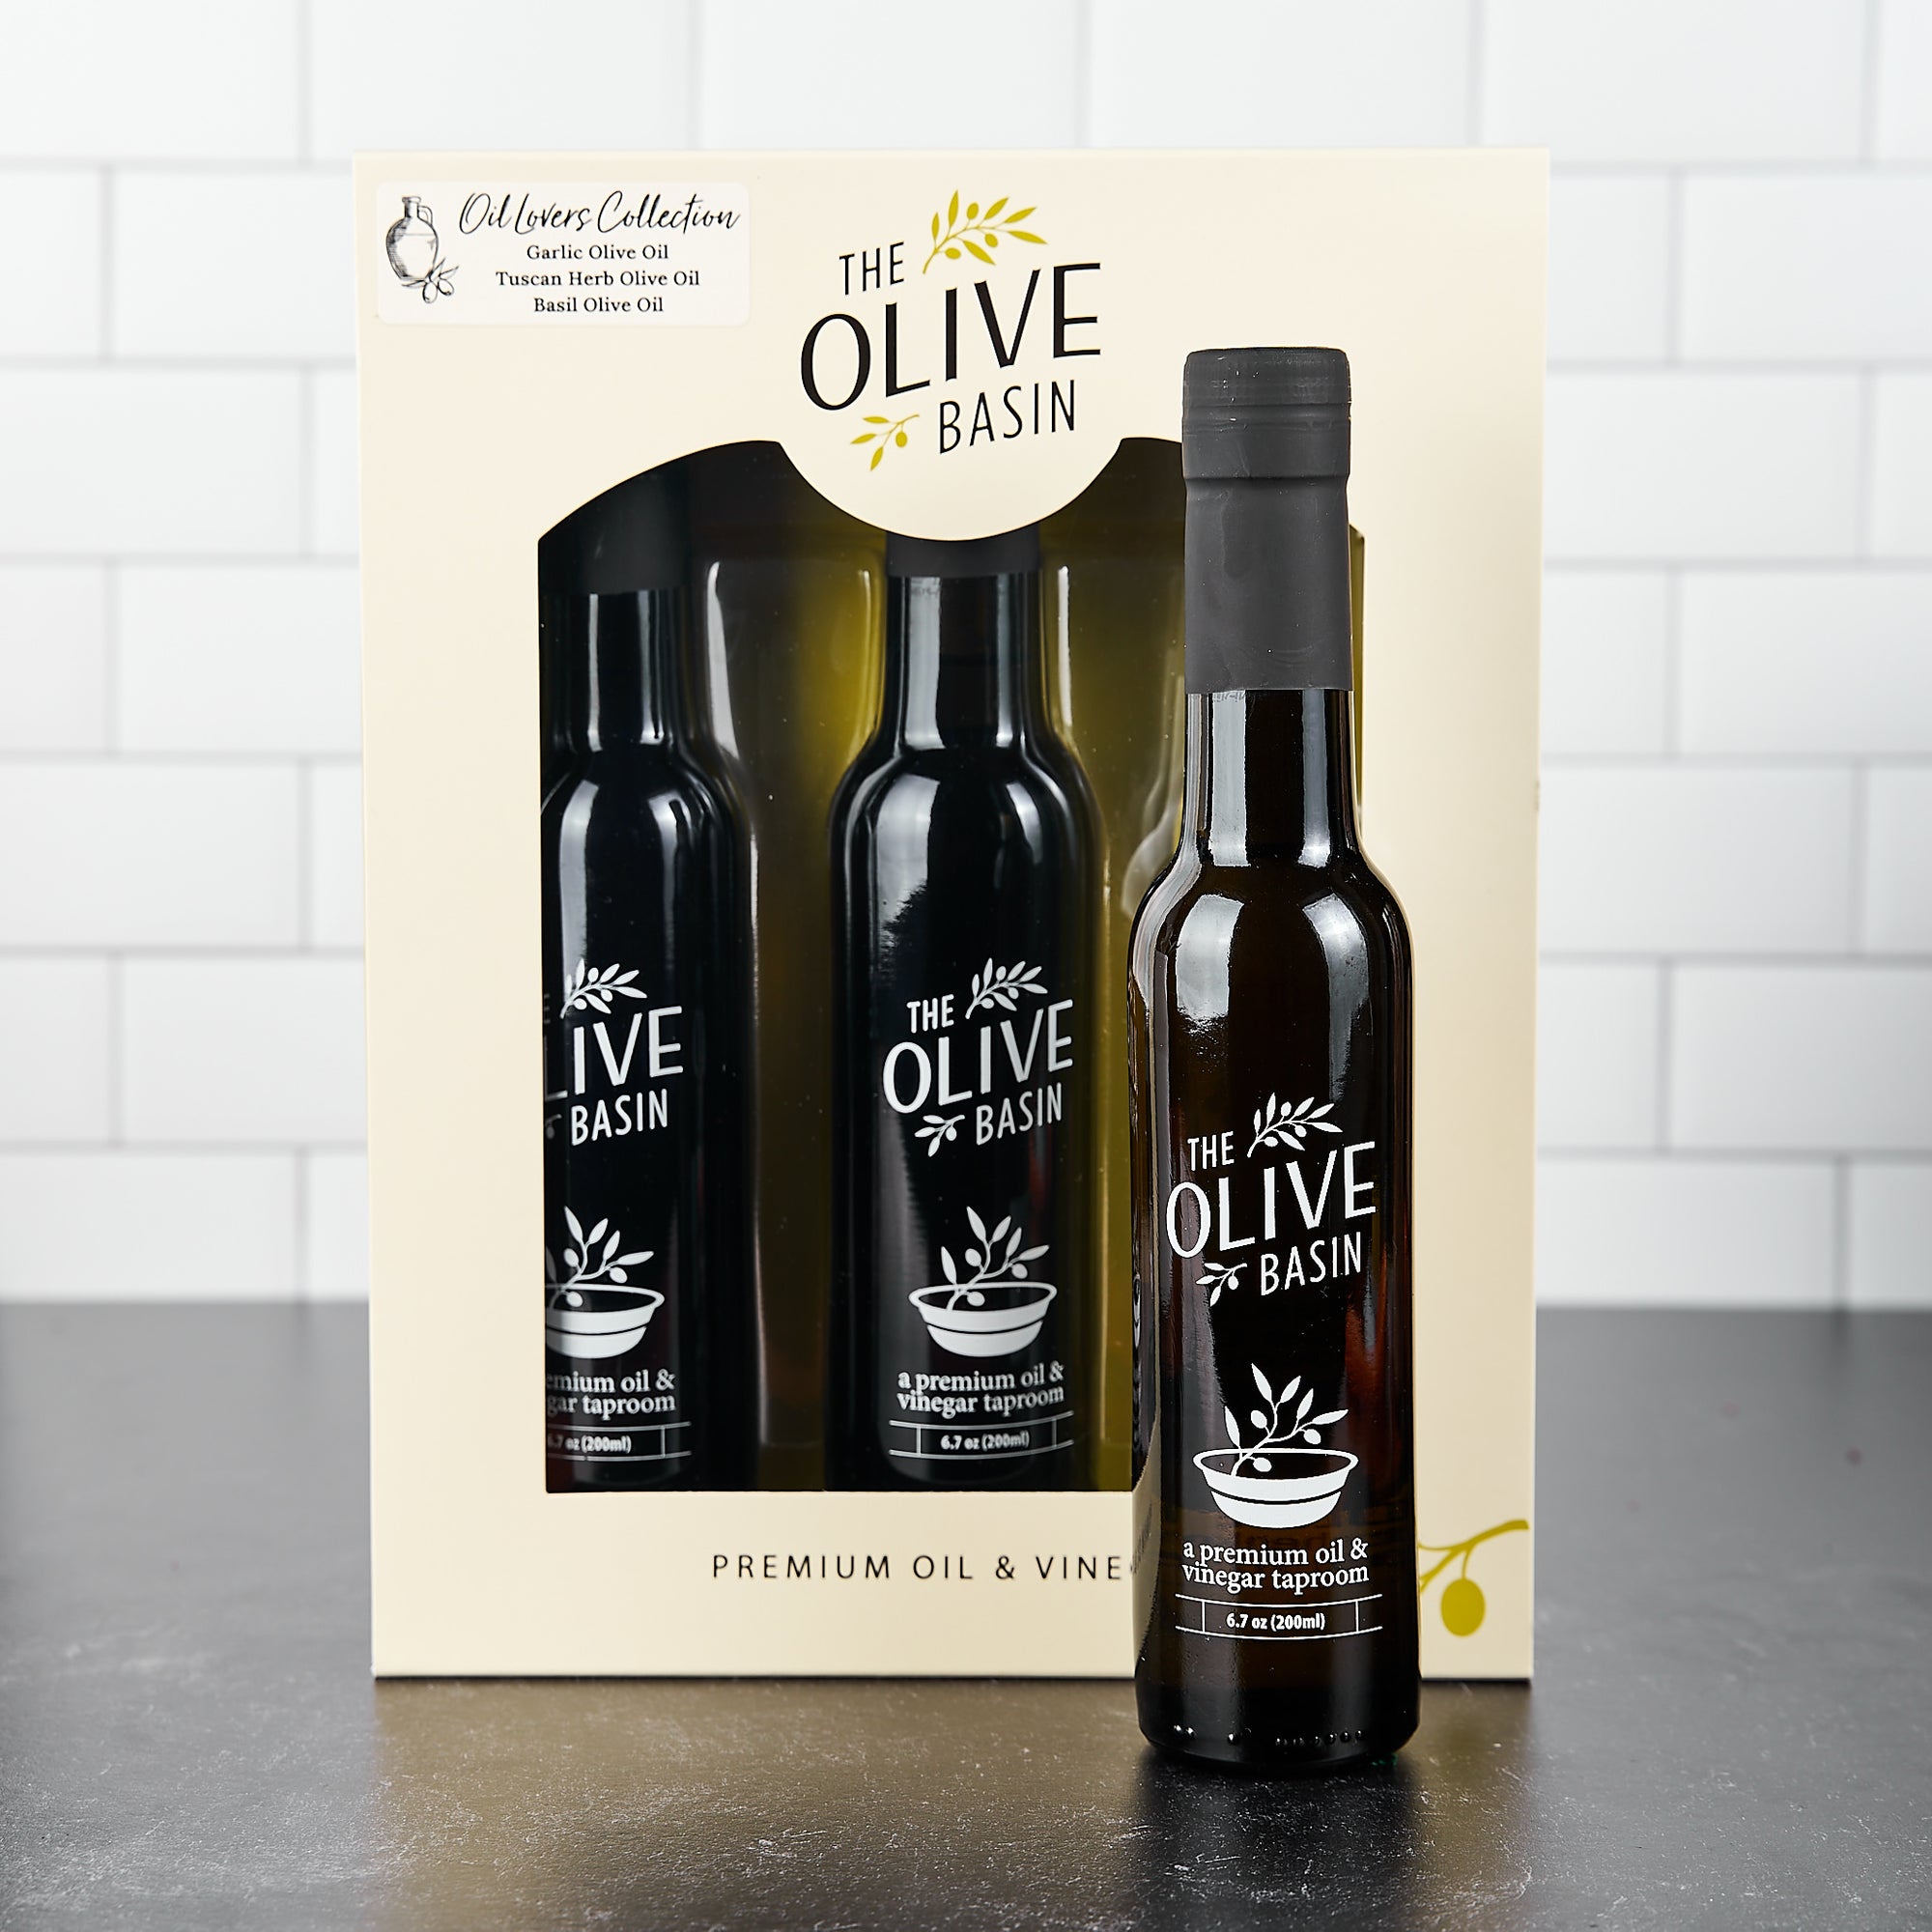 The Oil Lovers Collection - Olive Oil Trio